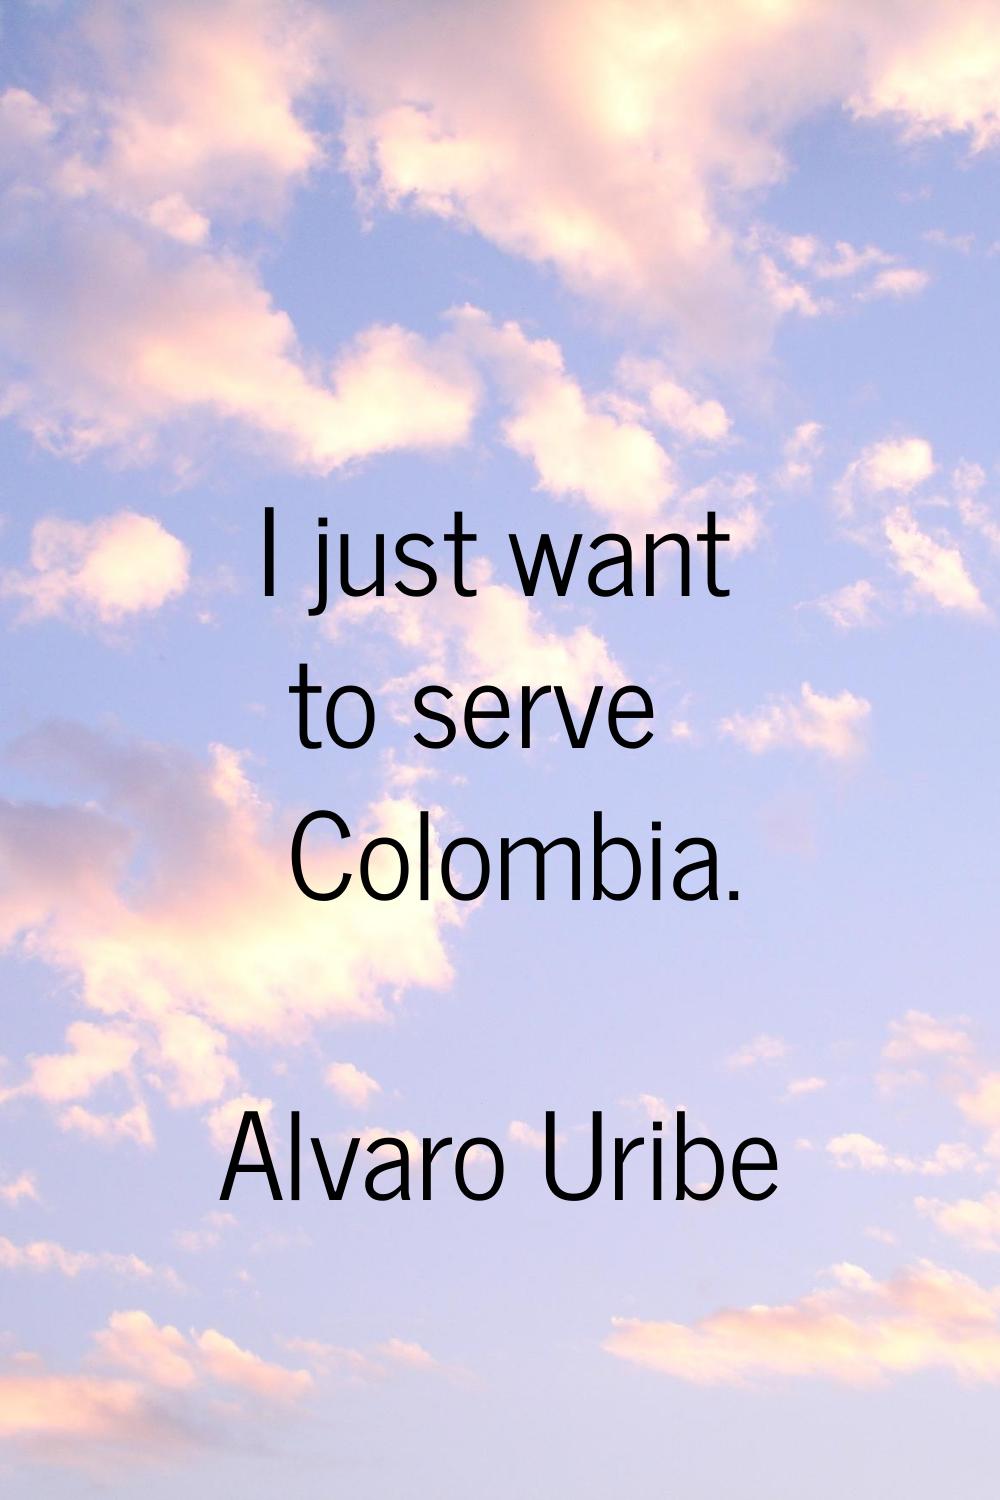 I just want to serve Colombia.